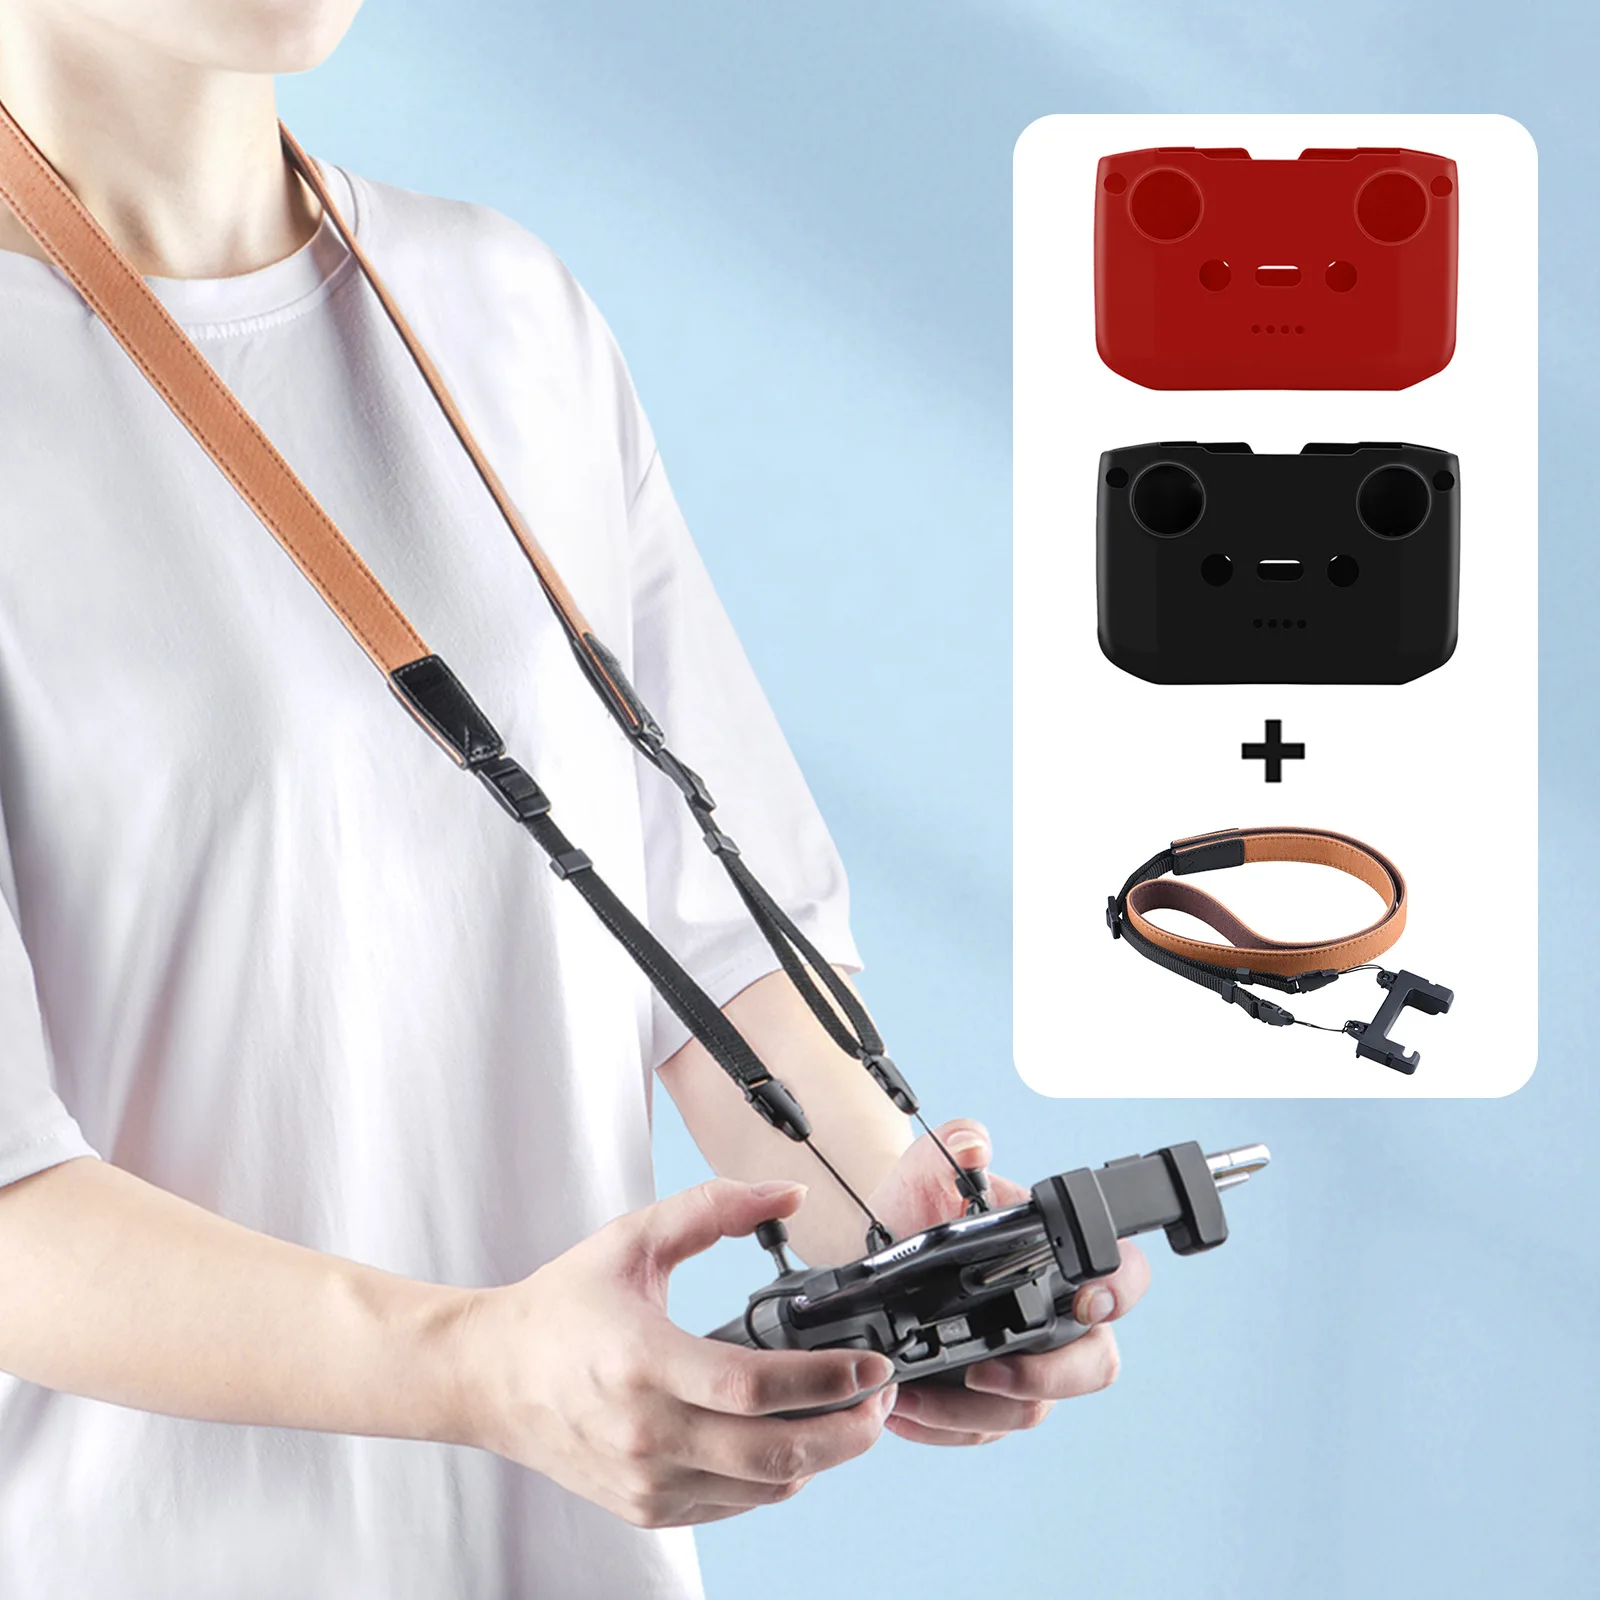 

SUNNYLIFE Soft Silicone Case Cover Skin Sleeve Protector Adjustable Neck Strap Lanyard for DJI Mavic Air2 2S Mini2 Accessories